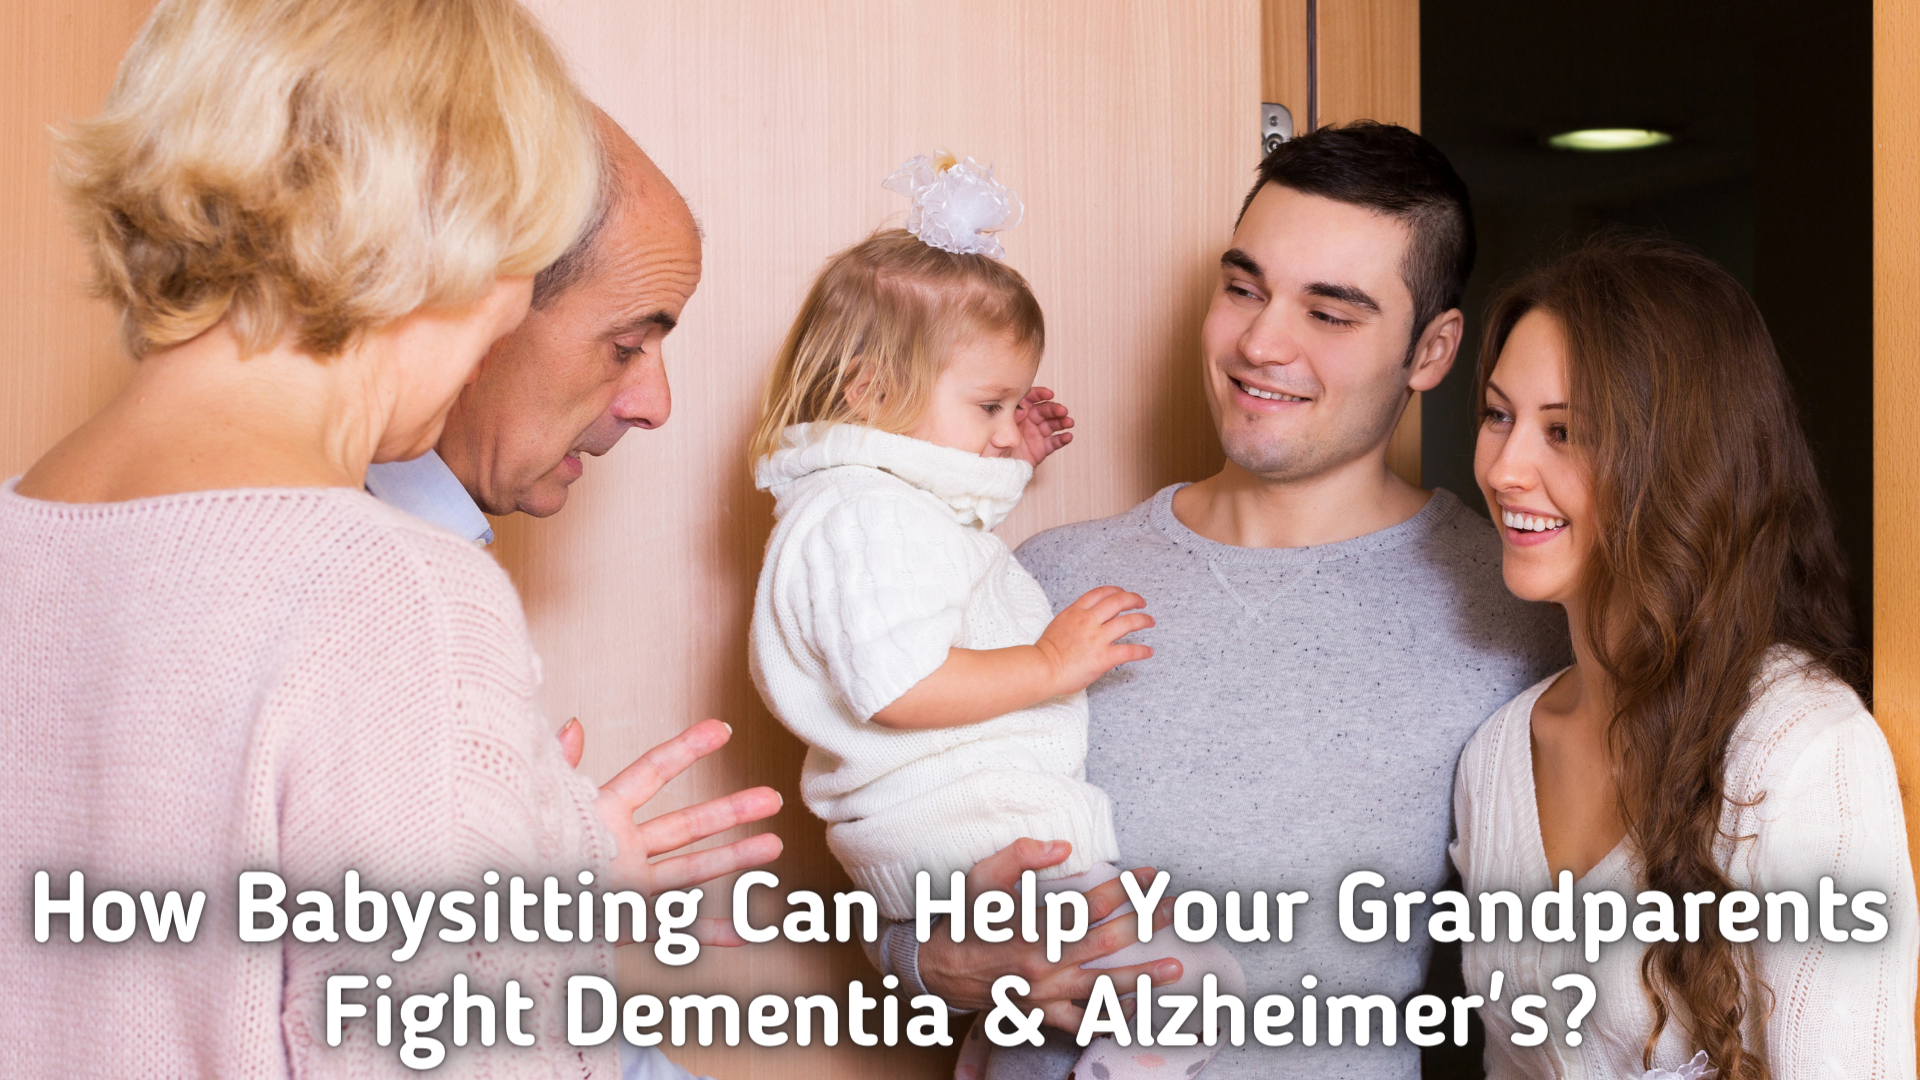 How Babysitting Can Help Your Grandparents Fight Dementia & Alzheimer's?